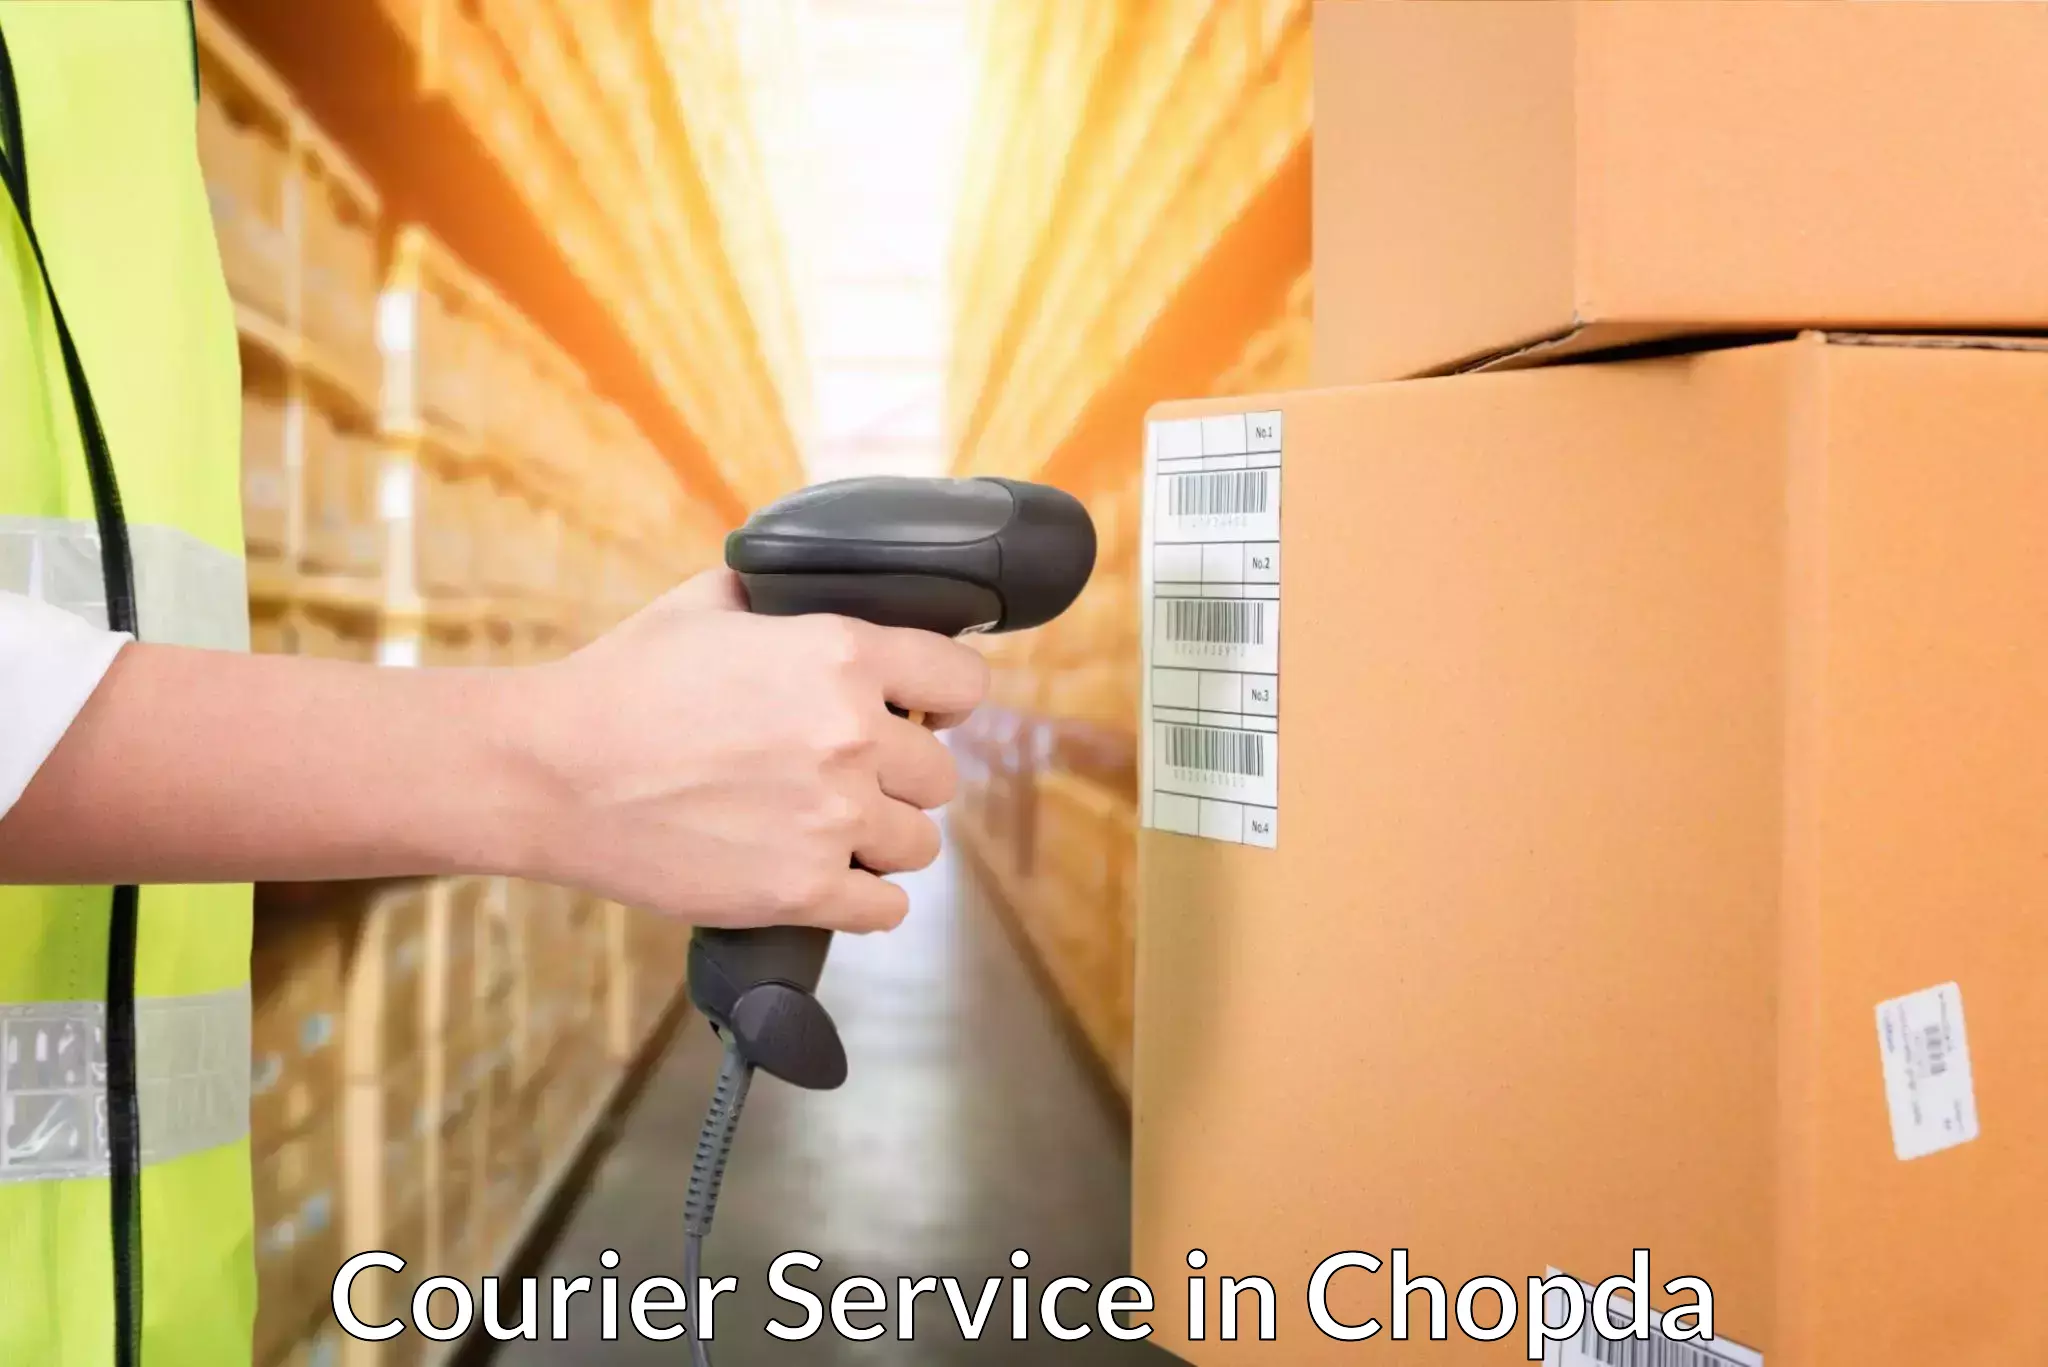 High-speed delivery in Chopda